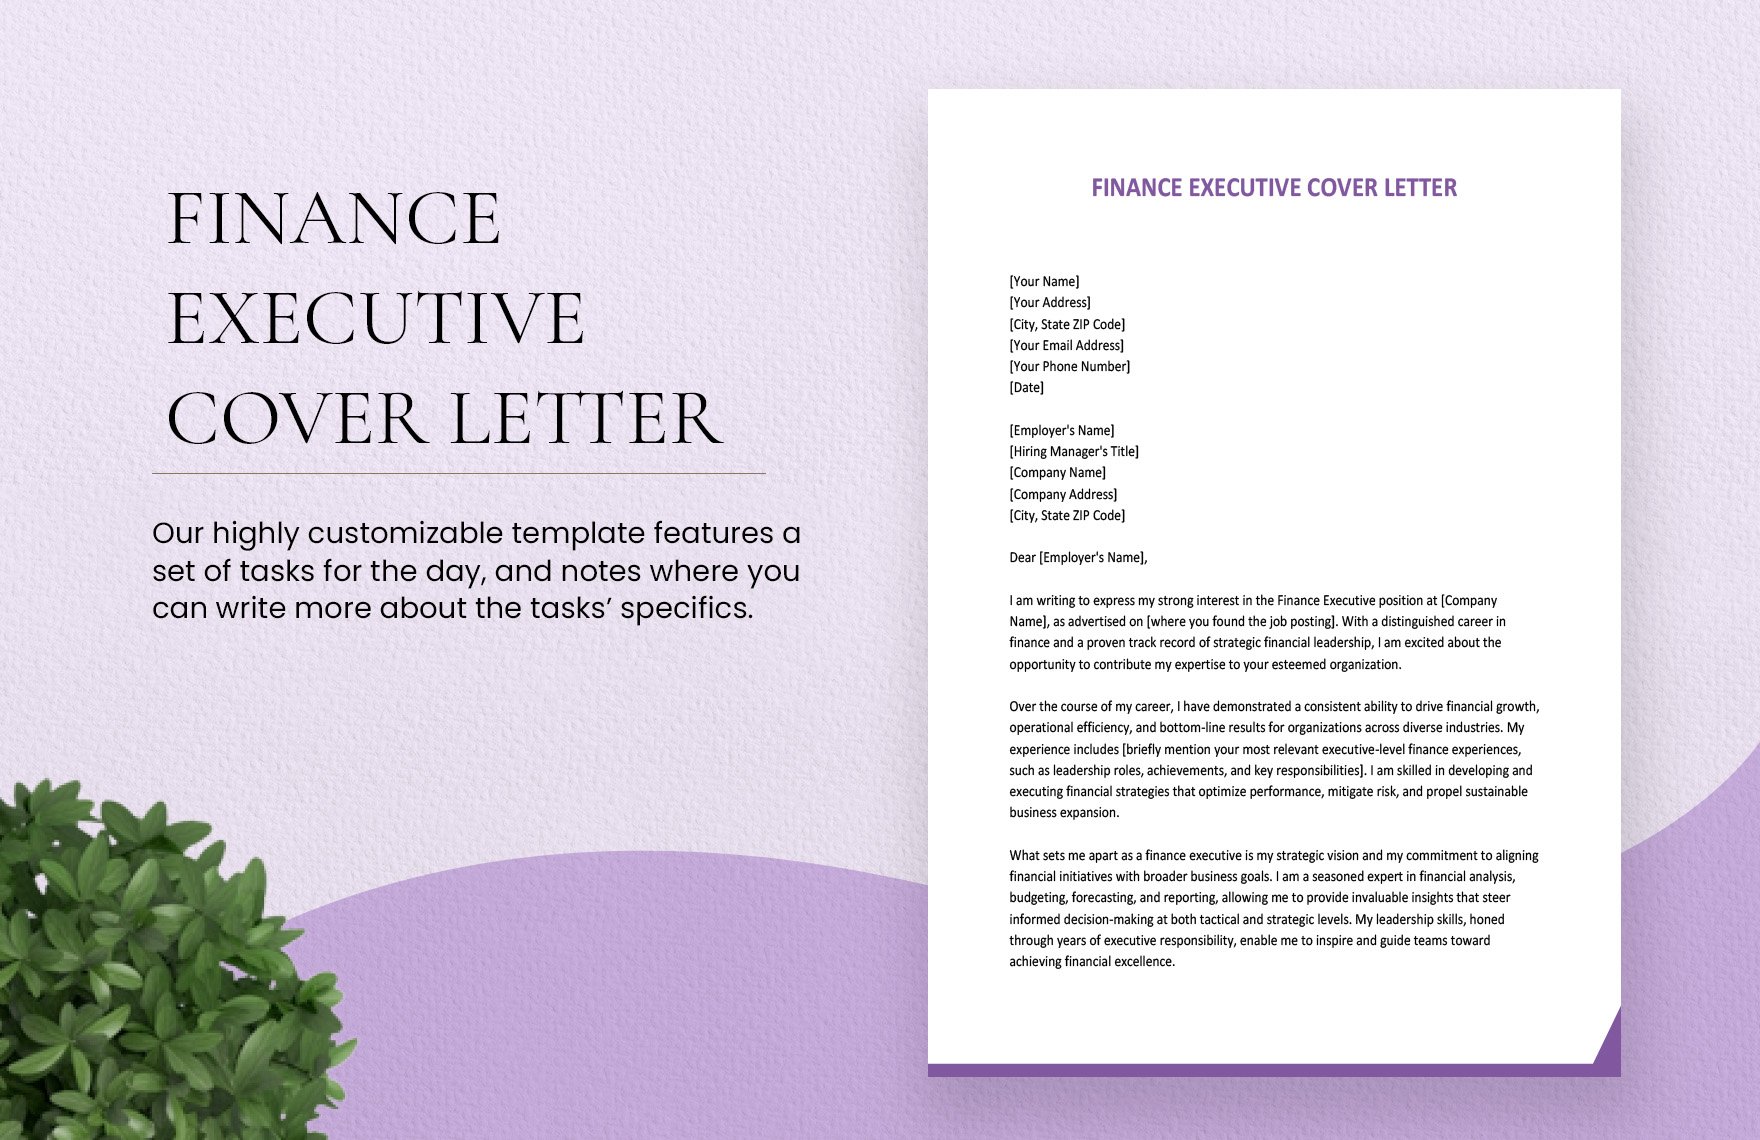 Finance Executive Cover Letter